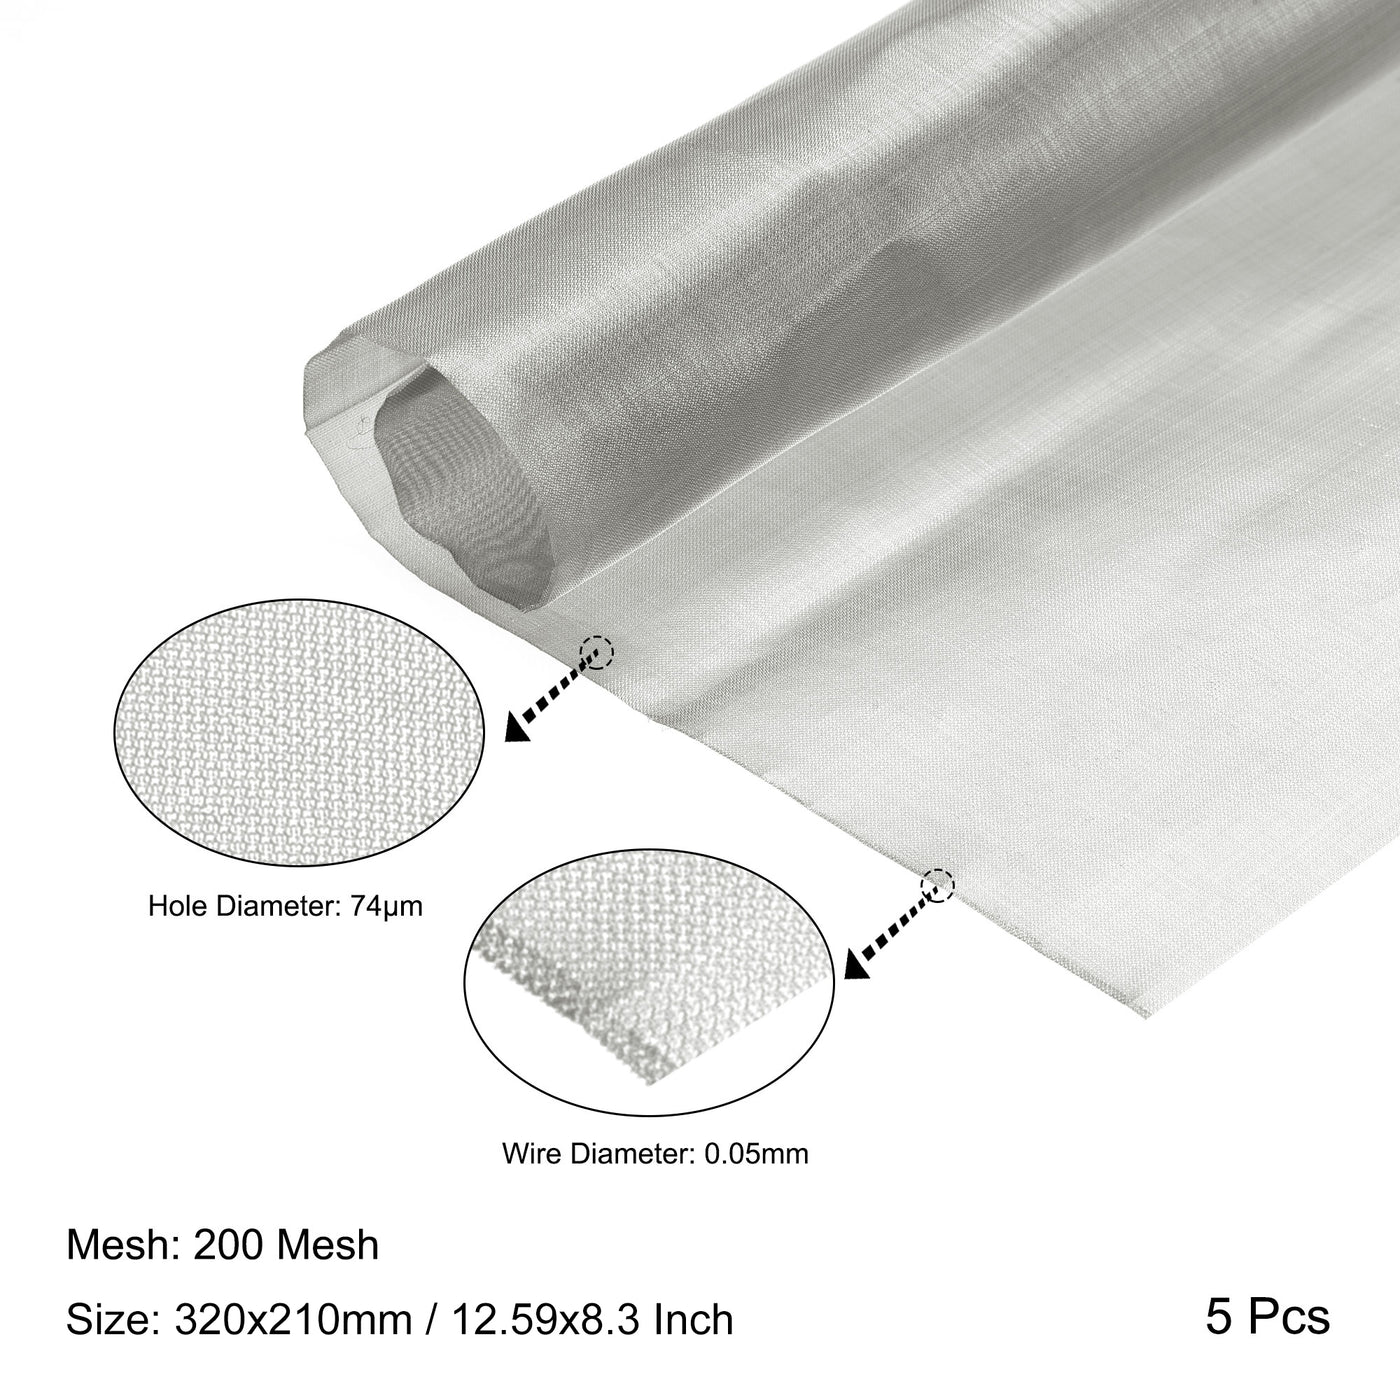 uxcell Uxcell Woven Wire Mesh 12.5"x8.3" 320x210mm, 200 Mesh 304 Stainless Steel Filter Screen Sheet, for Computer Cooling Fan Air Ventilation Cabinet, Pack of 5